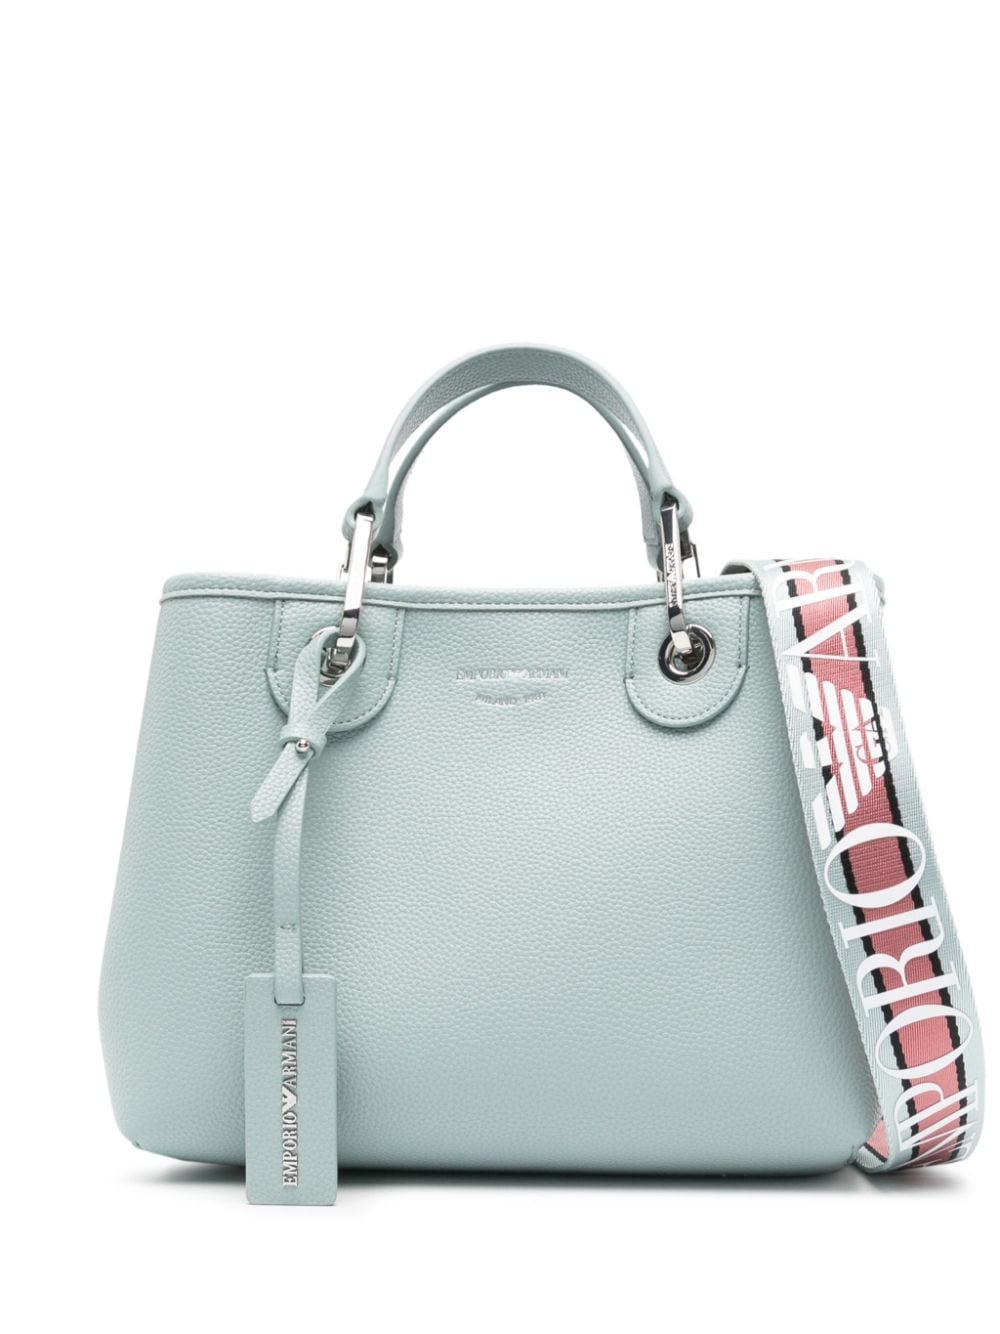 Clear Blue Faux Leather Grained Texture Handbag with Logo Charm and Adjustable Strap